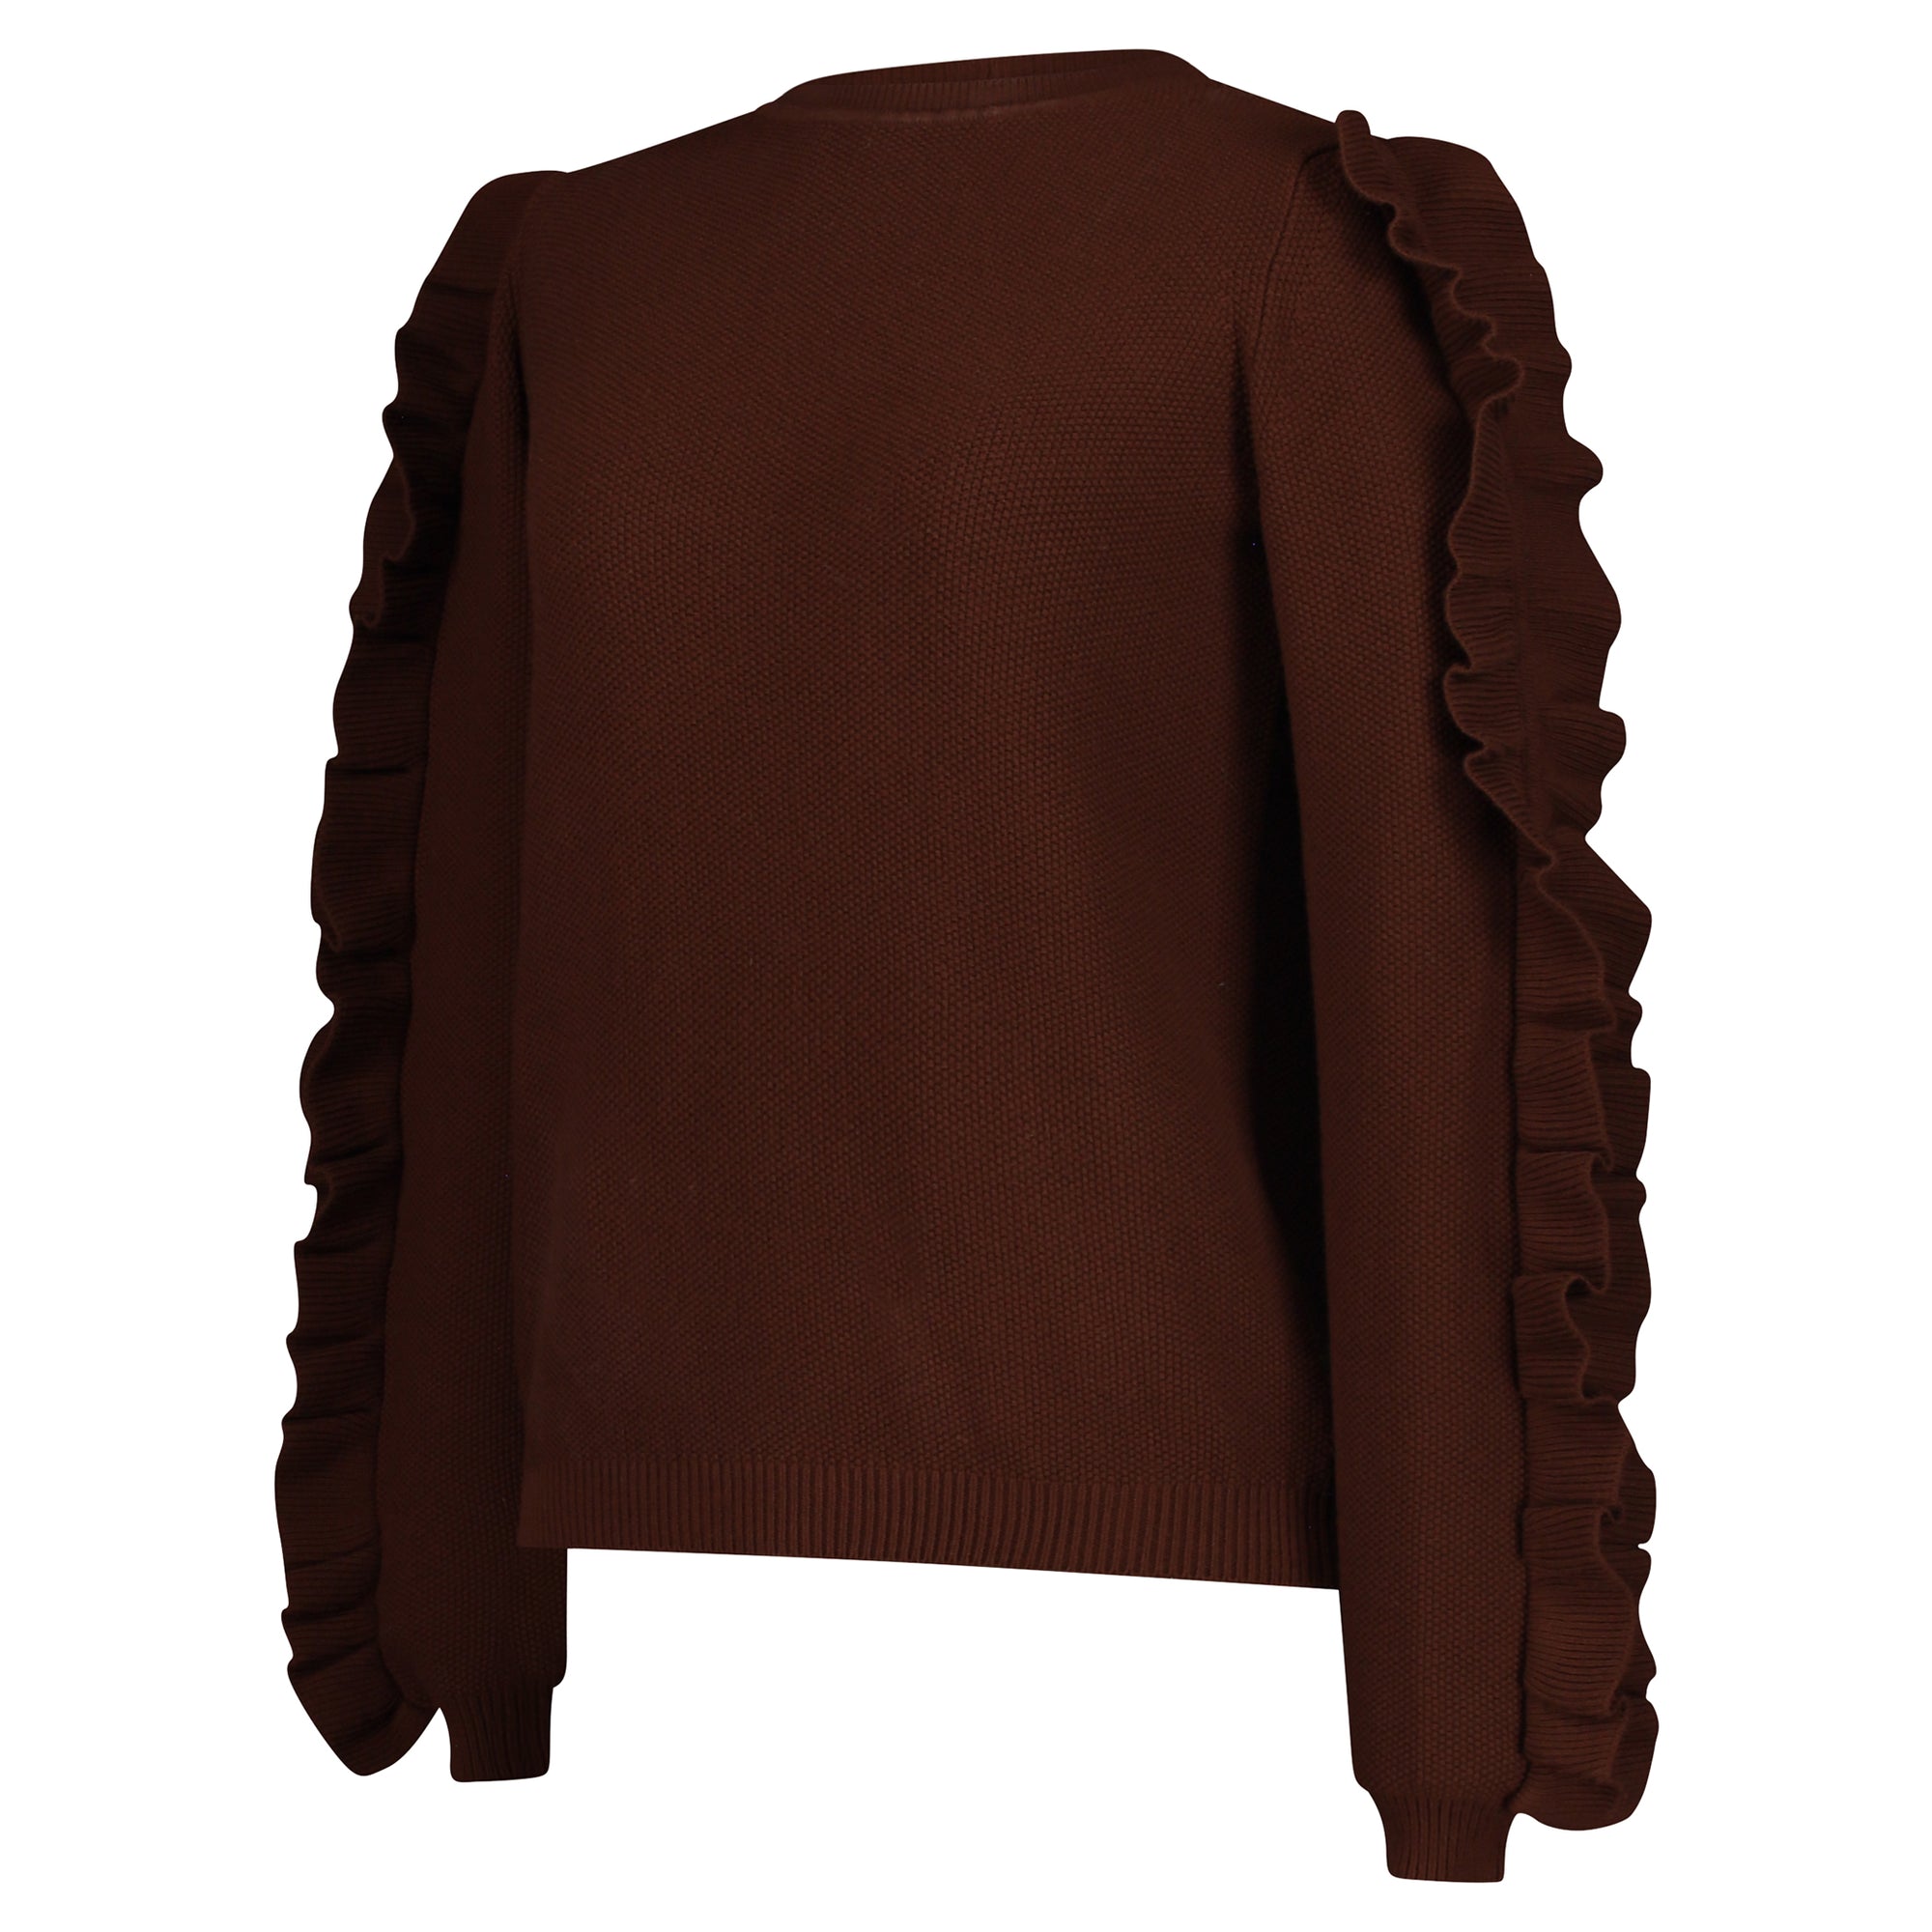 Max Mara Sweater with Ruffle-detailed Sleeves